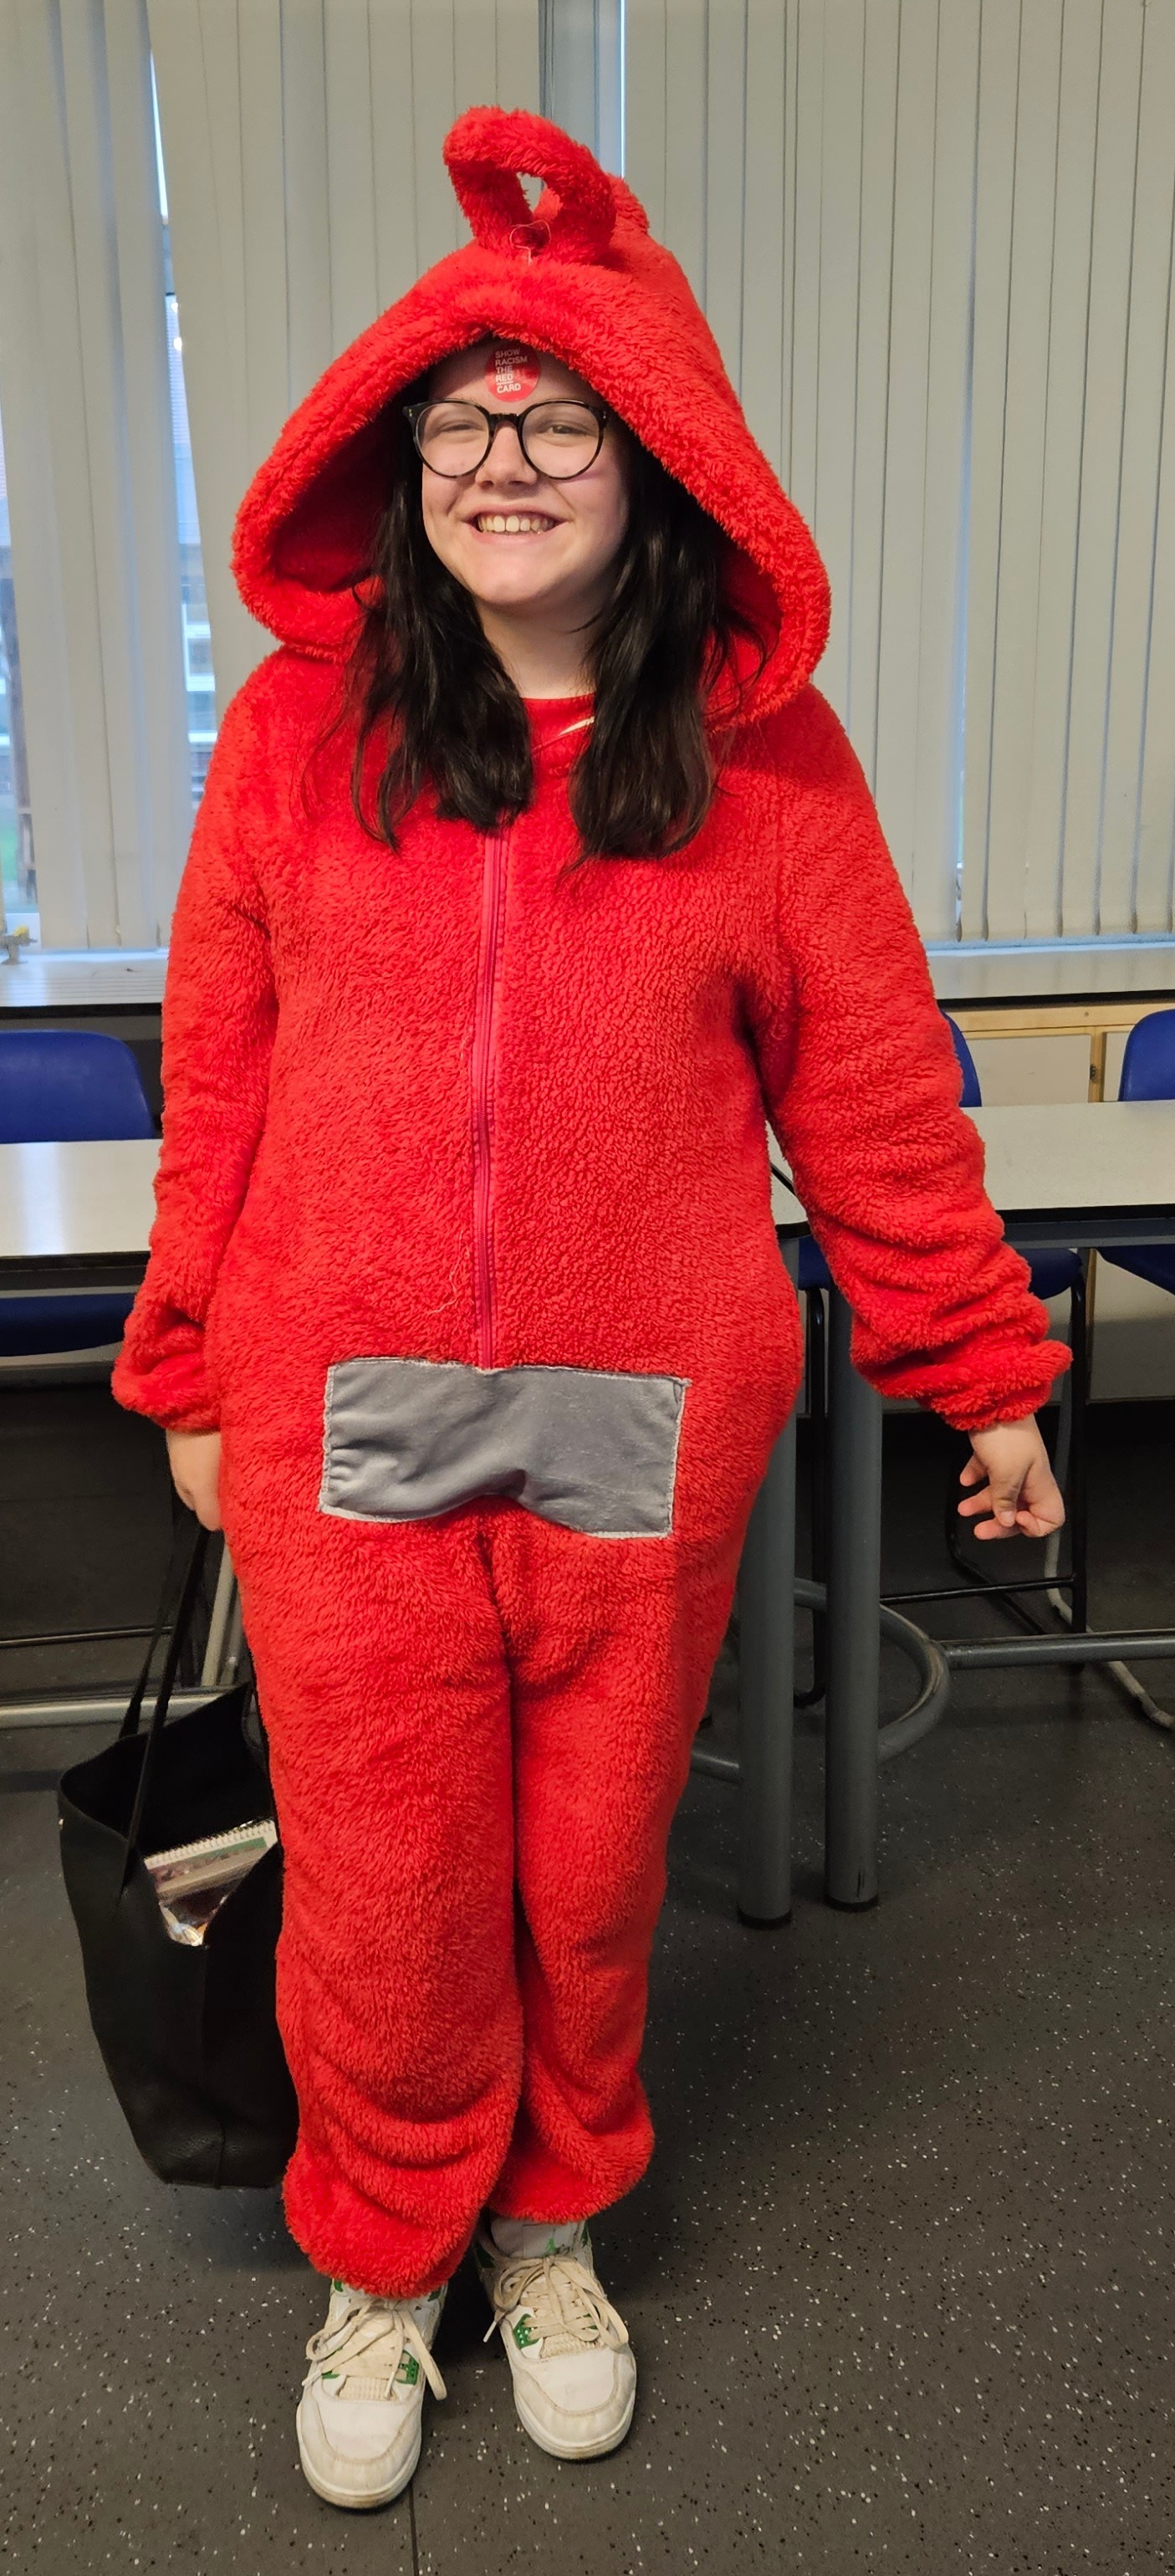 Year 7, Keeva, wore her red Teletubby onesie for the event. 